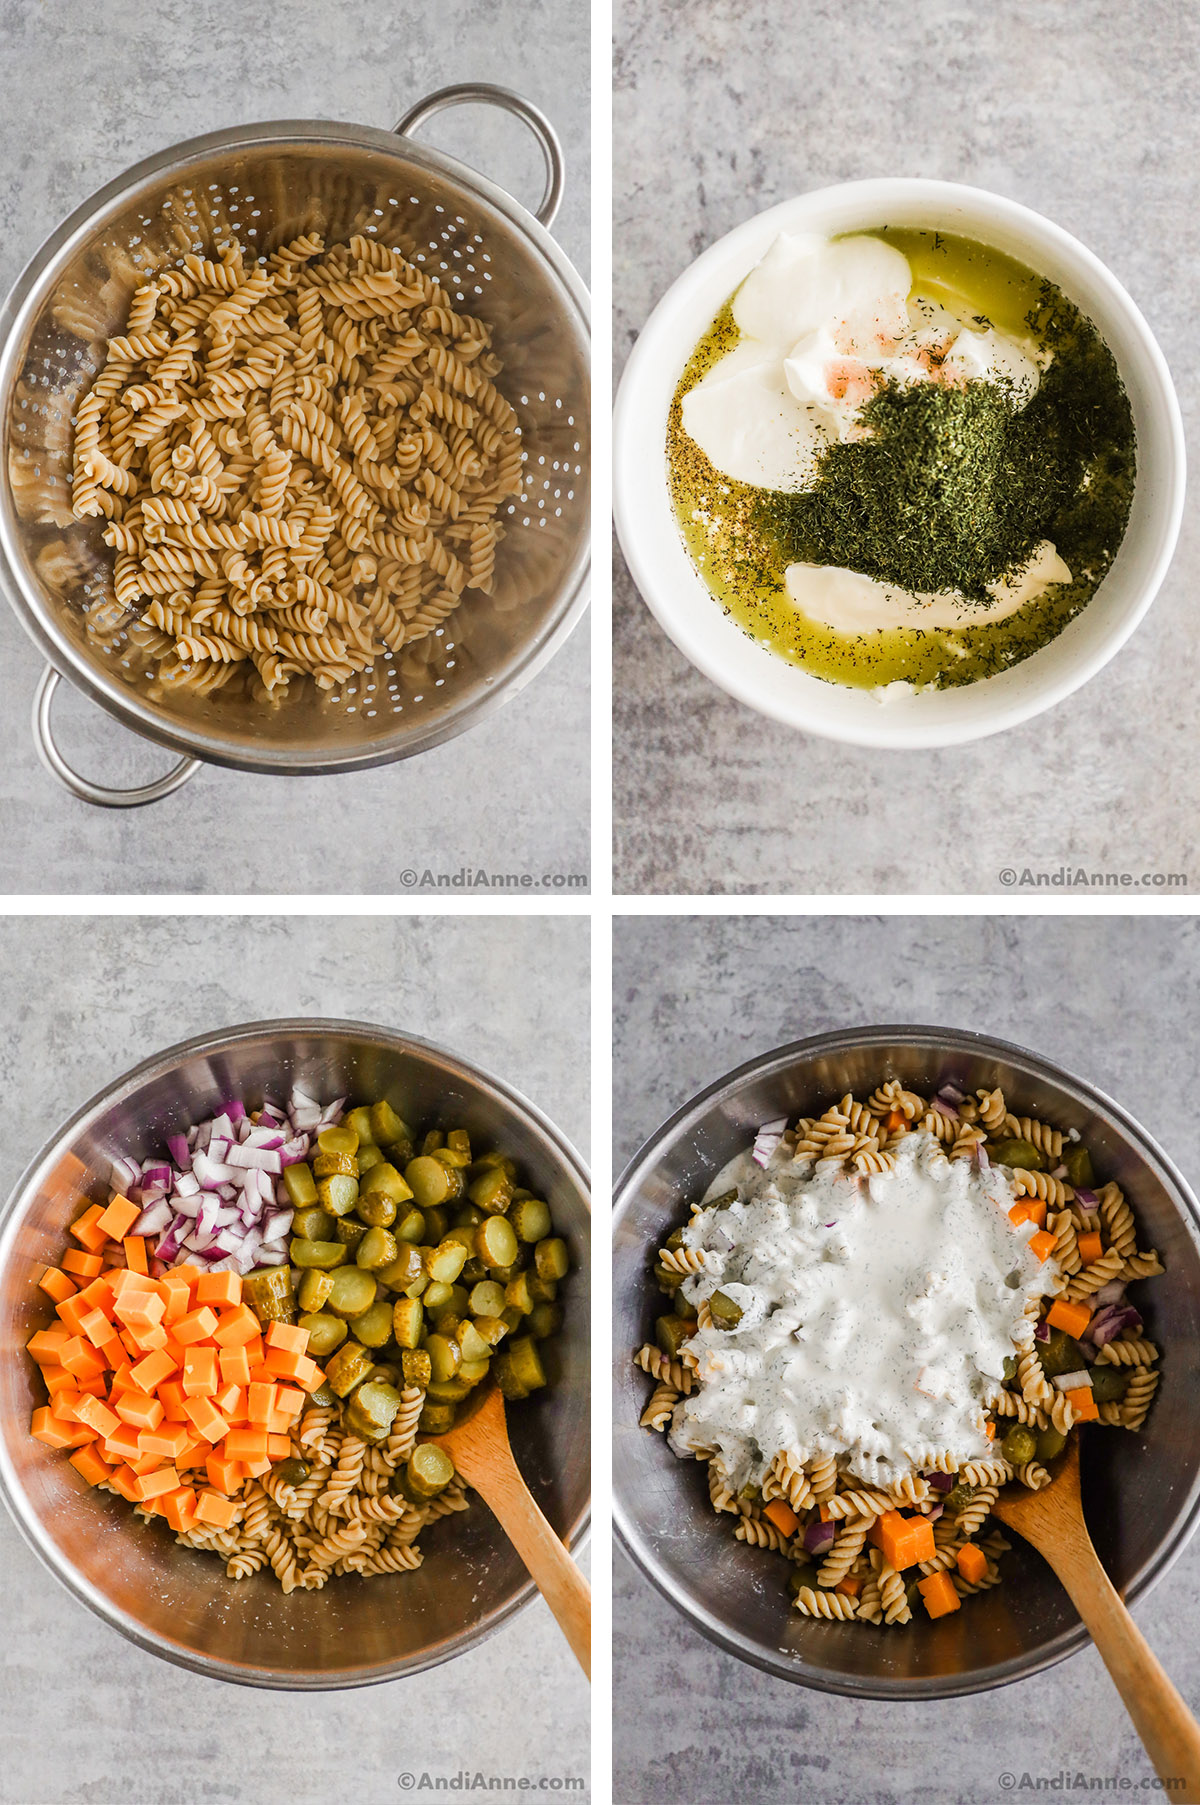 Four images showing steps to make recipe. First is cooked pasta in a strainer. Second is dressing ingredients in a bowl unmixed, third is chopped cheese, pickles, onion and pasta noodles in a bowl. Fourth is creamy dressing poured overtop of salad ingredients. 